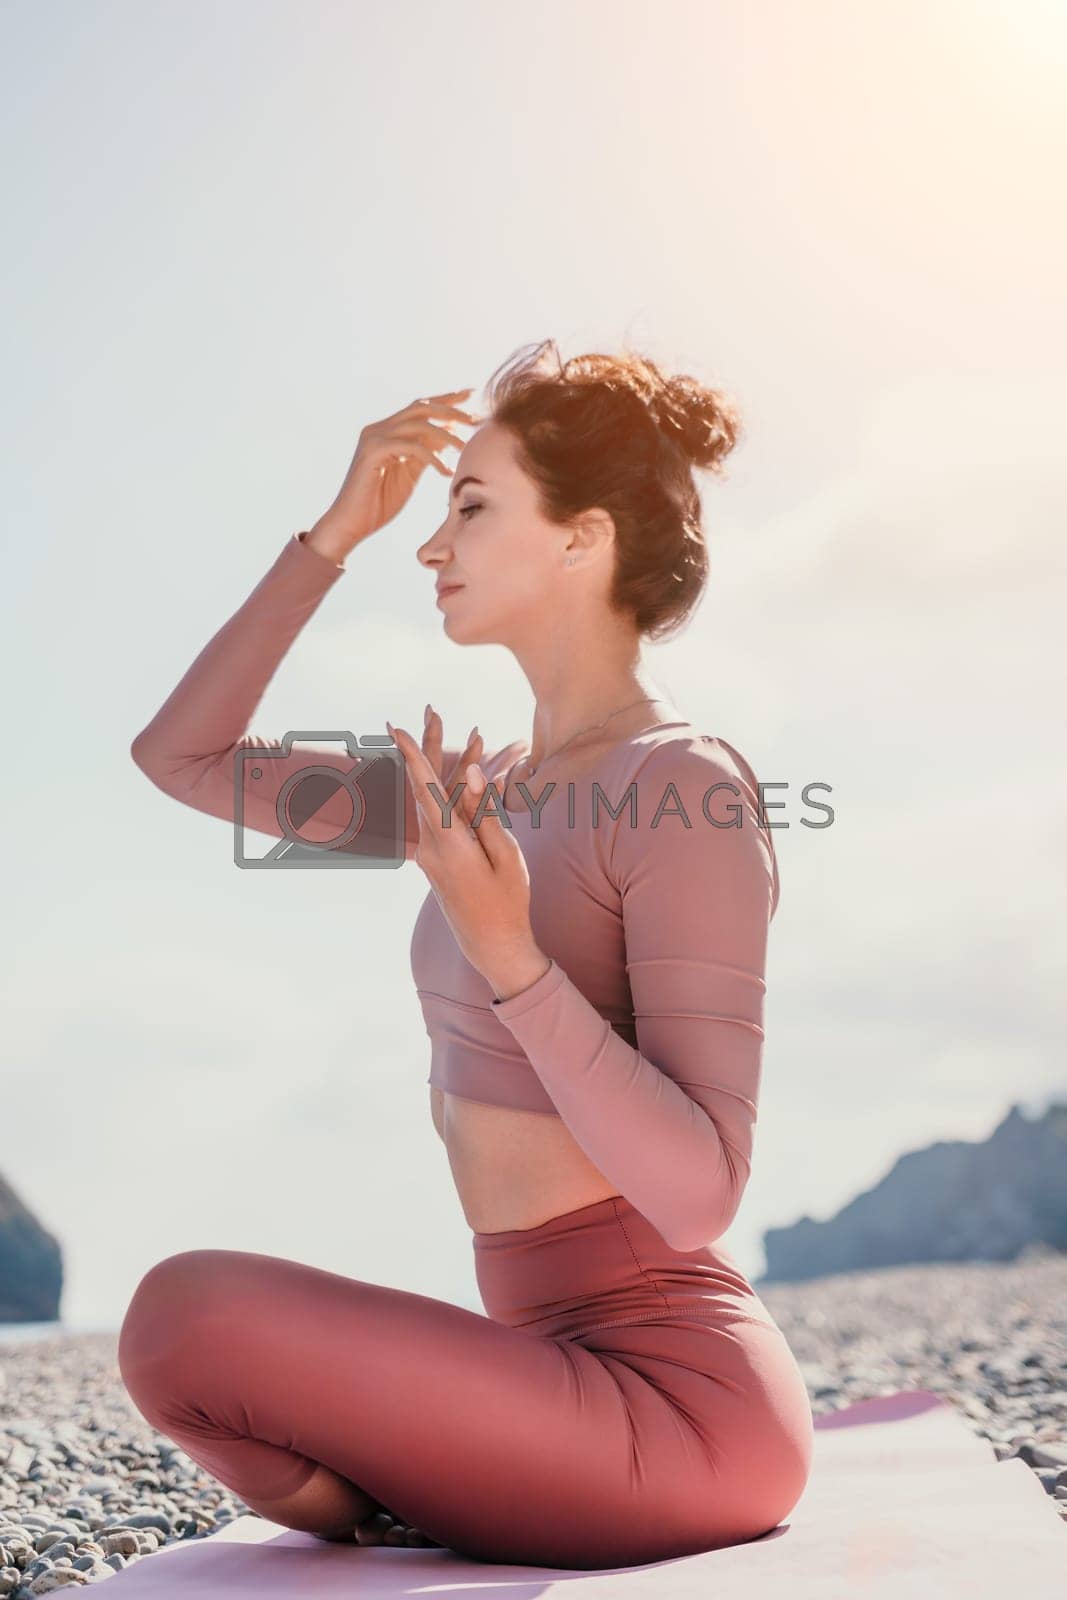 Royalty free image of Middle aged well looking woman with black hair, fitness instructor in leggings and tops doing stretching and pilates on yoga mat near the sea. Female fitness yoga routine concept. Healthy lifestyle by panophotograph